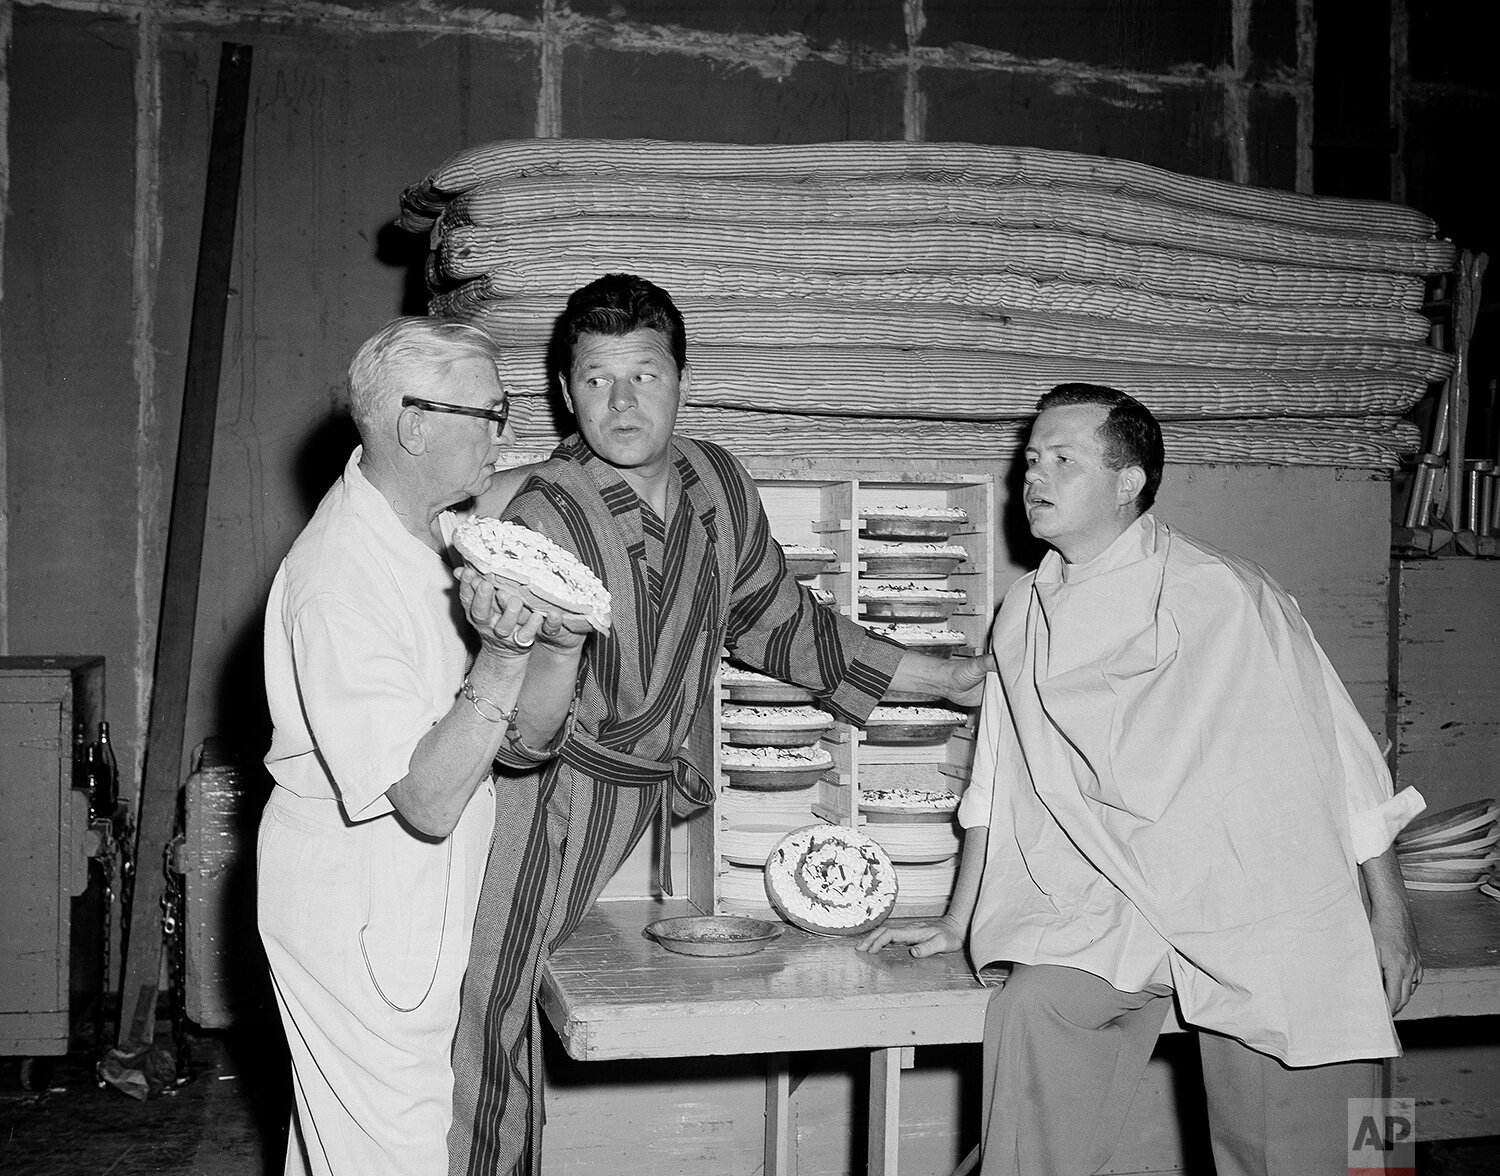  With AP reporter Bob Thomas, right, on the receiving end, movie director Lloyd Bacon, left, shows actor Jack Carson how to balance the succulent pie for an accurate toss at Bob's face, in Los Angeles on July 5, 1949. (AP Photo) 